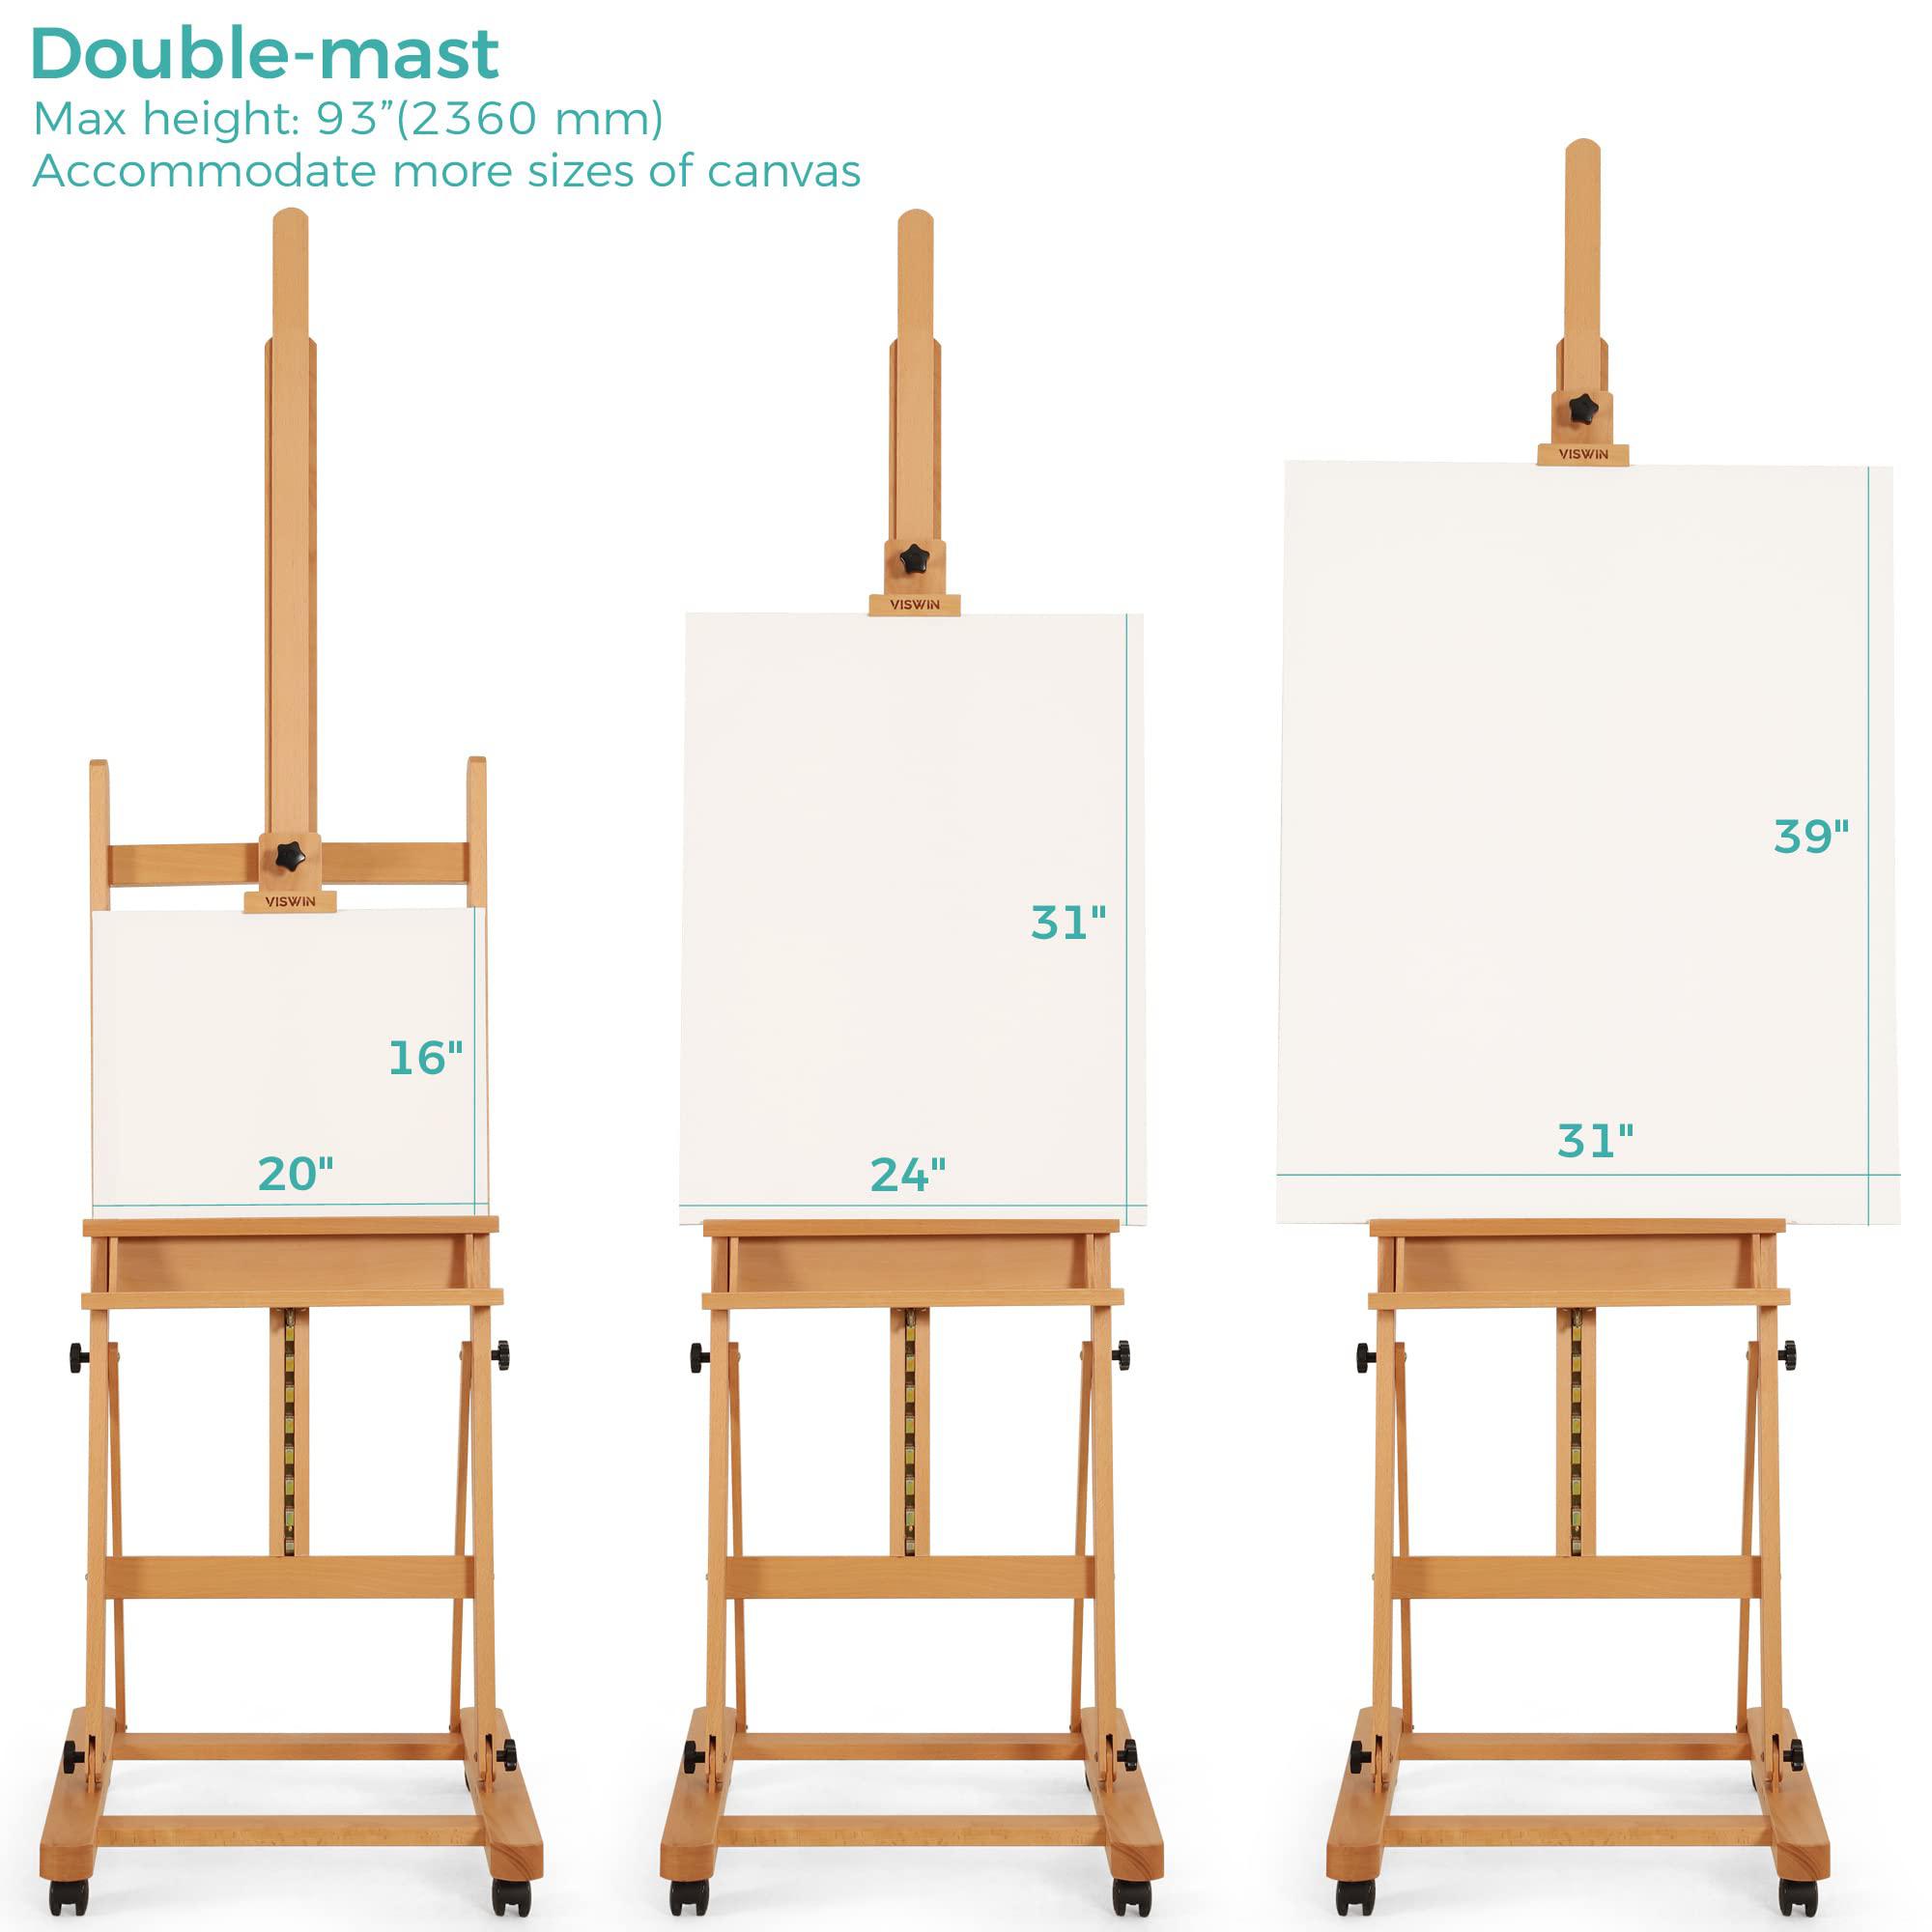 viswin premium h frame easel 75" to 146"h, hold canvas to 93", solid beech wood large artist easel for painting canvas, studi